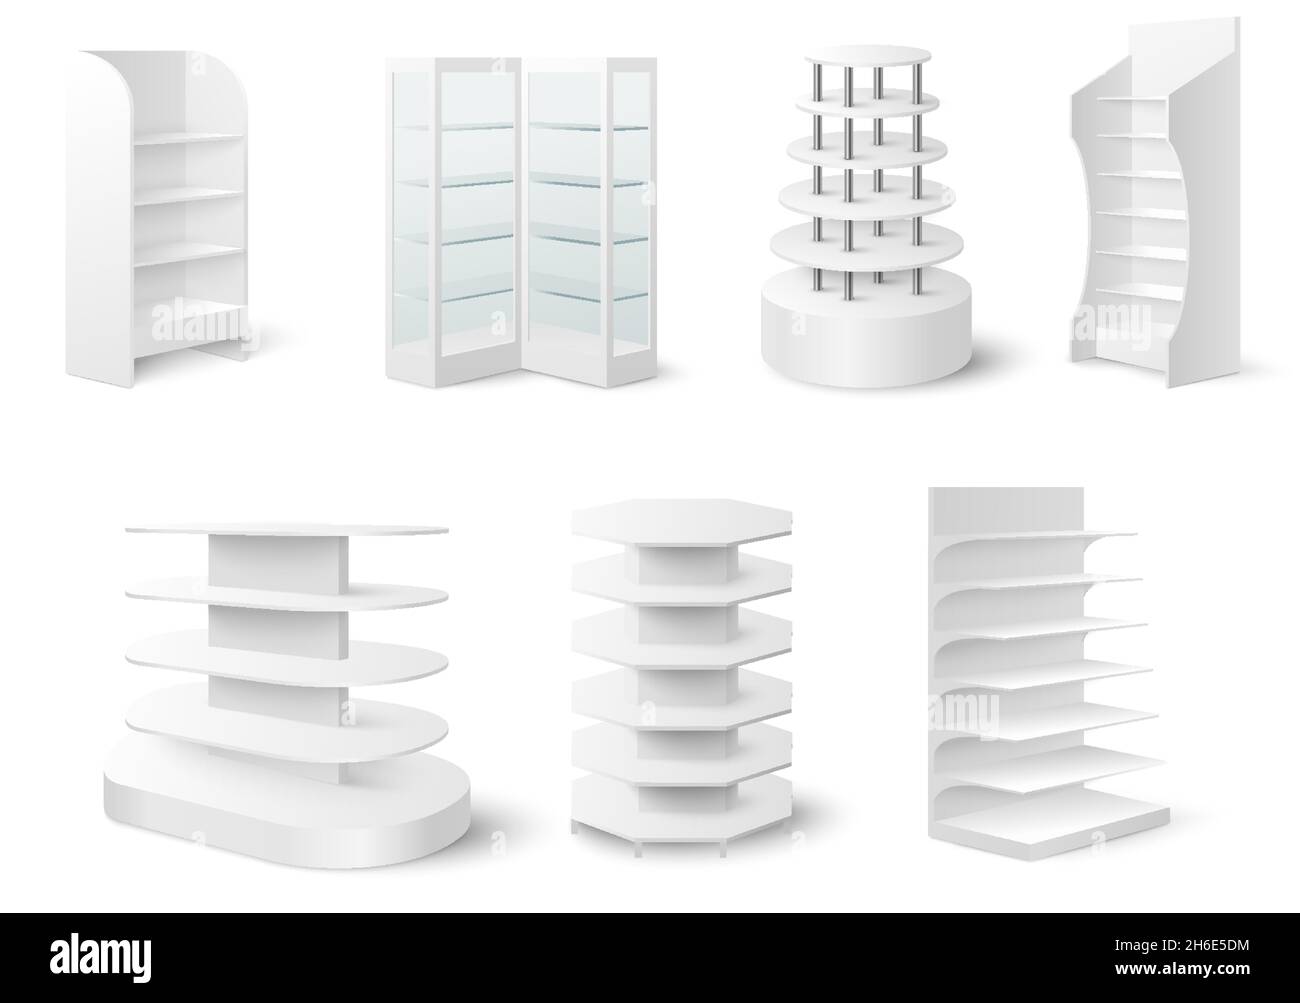 White empty showcase display mockup set, vector illustration. Retail display stand, rack, glass case, store shelves. Stock Vector